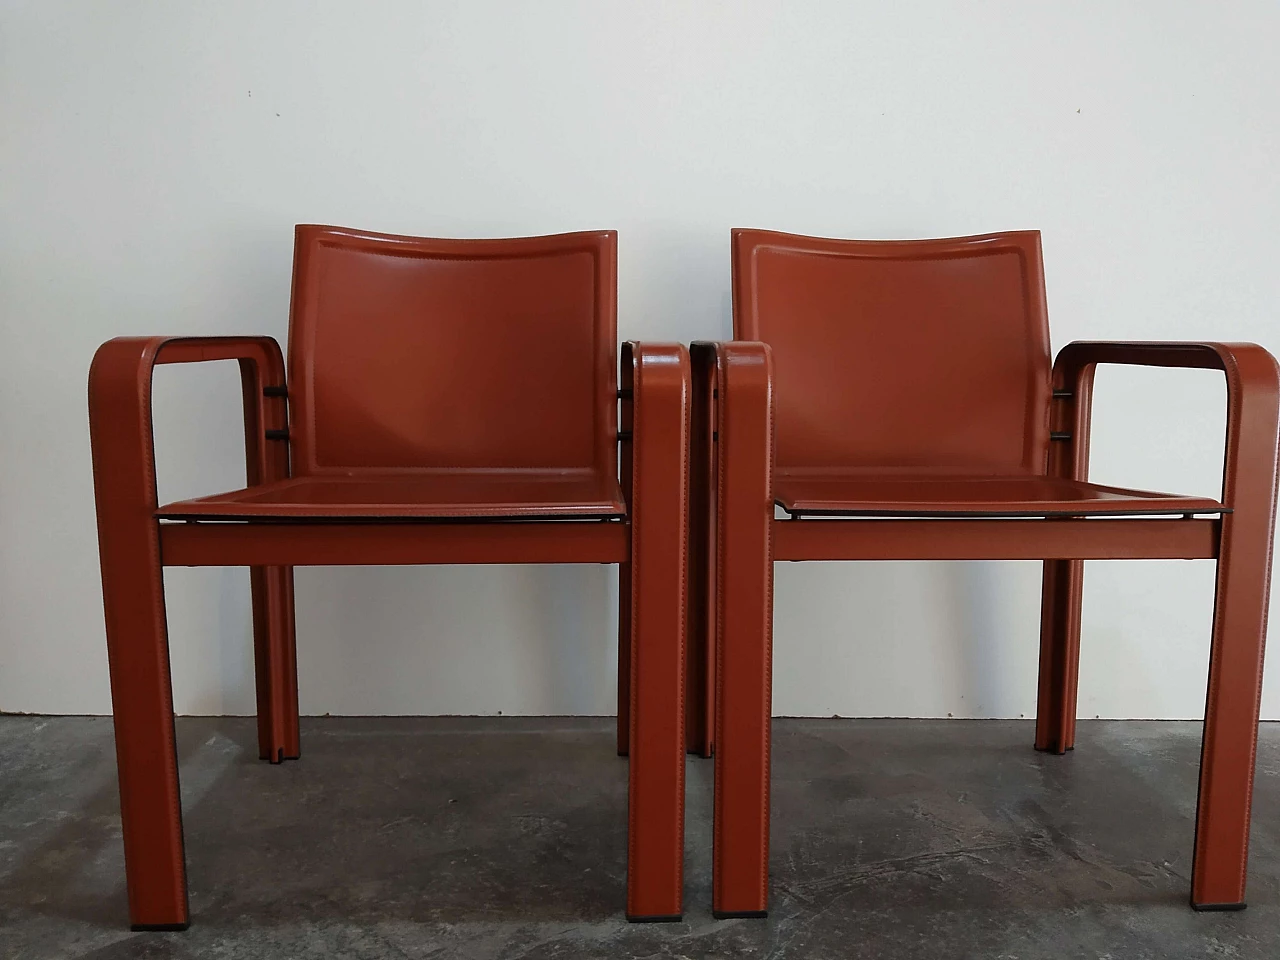 Pair of Golfo dei Poeti chairs by Toussaint & Angeloni manufactured by Matteo Grassi, 1980s 27